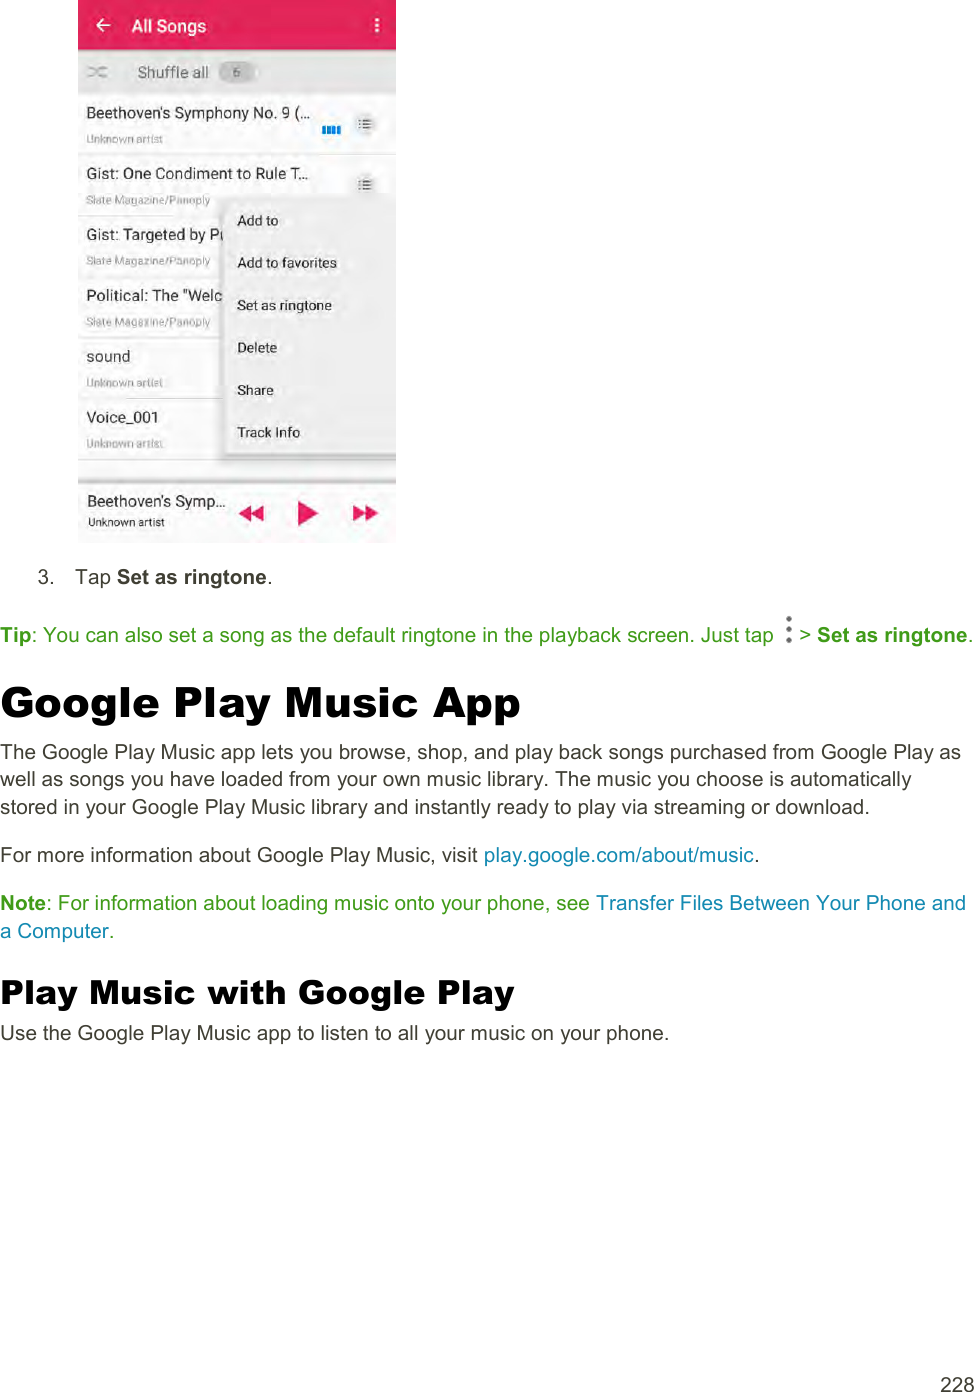  228   3.  Tap Set as ringtone. Tip: You can also set a song as the default ringtone in the playback screen. Just tap   &gt; Set as ringtone. Google Play Music App The Google Play Music app lets you browse, shop, and play back songs purchased from Google Play as well as songs you have loaded from your own music library. The music you choose is automatically stored in your Google Play Music library and instantly ready to play via streaming or download. For more information about Google Play Music, visit play.google.com/about/music. Note: For information about loading music onto your phone, see Transfer Files Between Your Phone and a Computer. Play Music with Google Play Use the Google Play Music app to listen to all your music on your phone. 